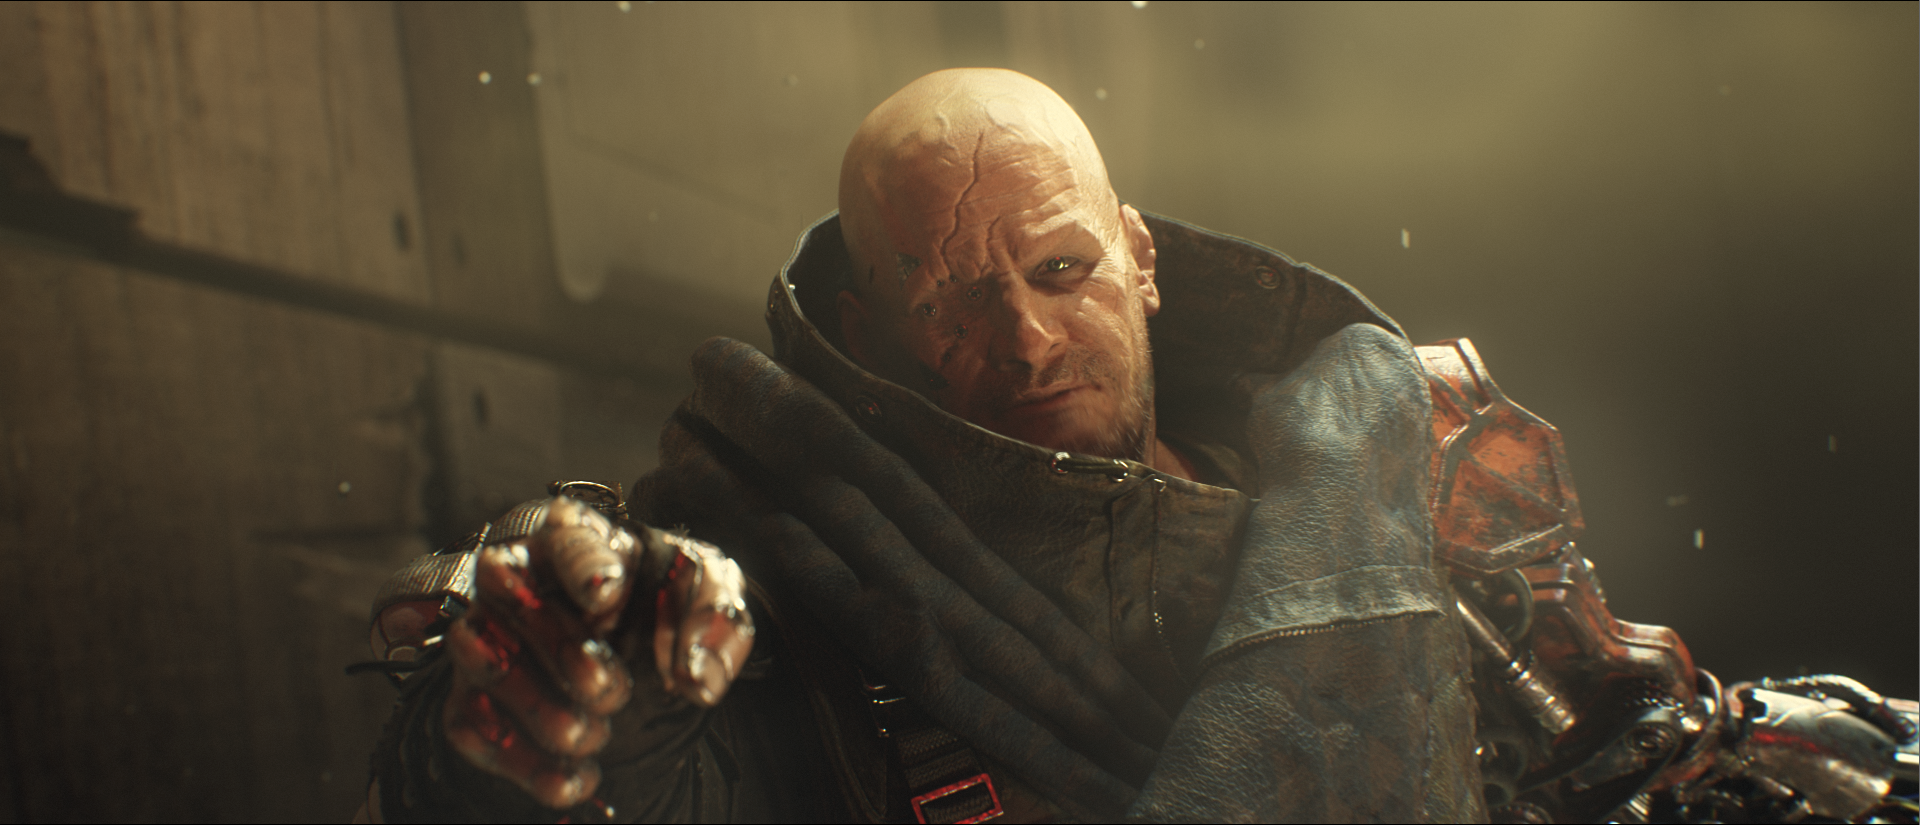 Deus Ex Mankind Divided Screenshot Showing a Character with a Heavily Scarred Face Pointing Forward